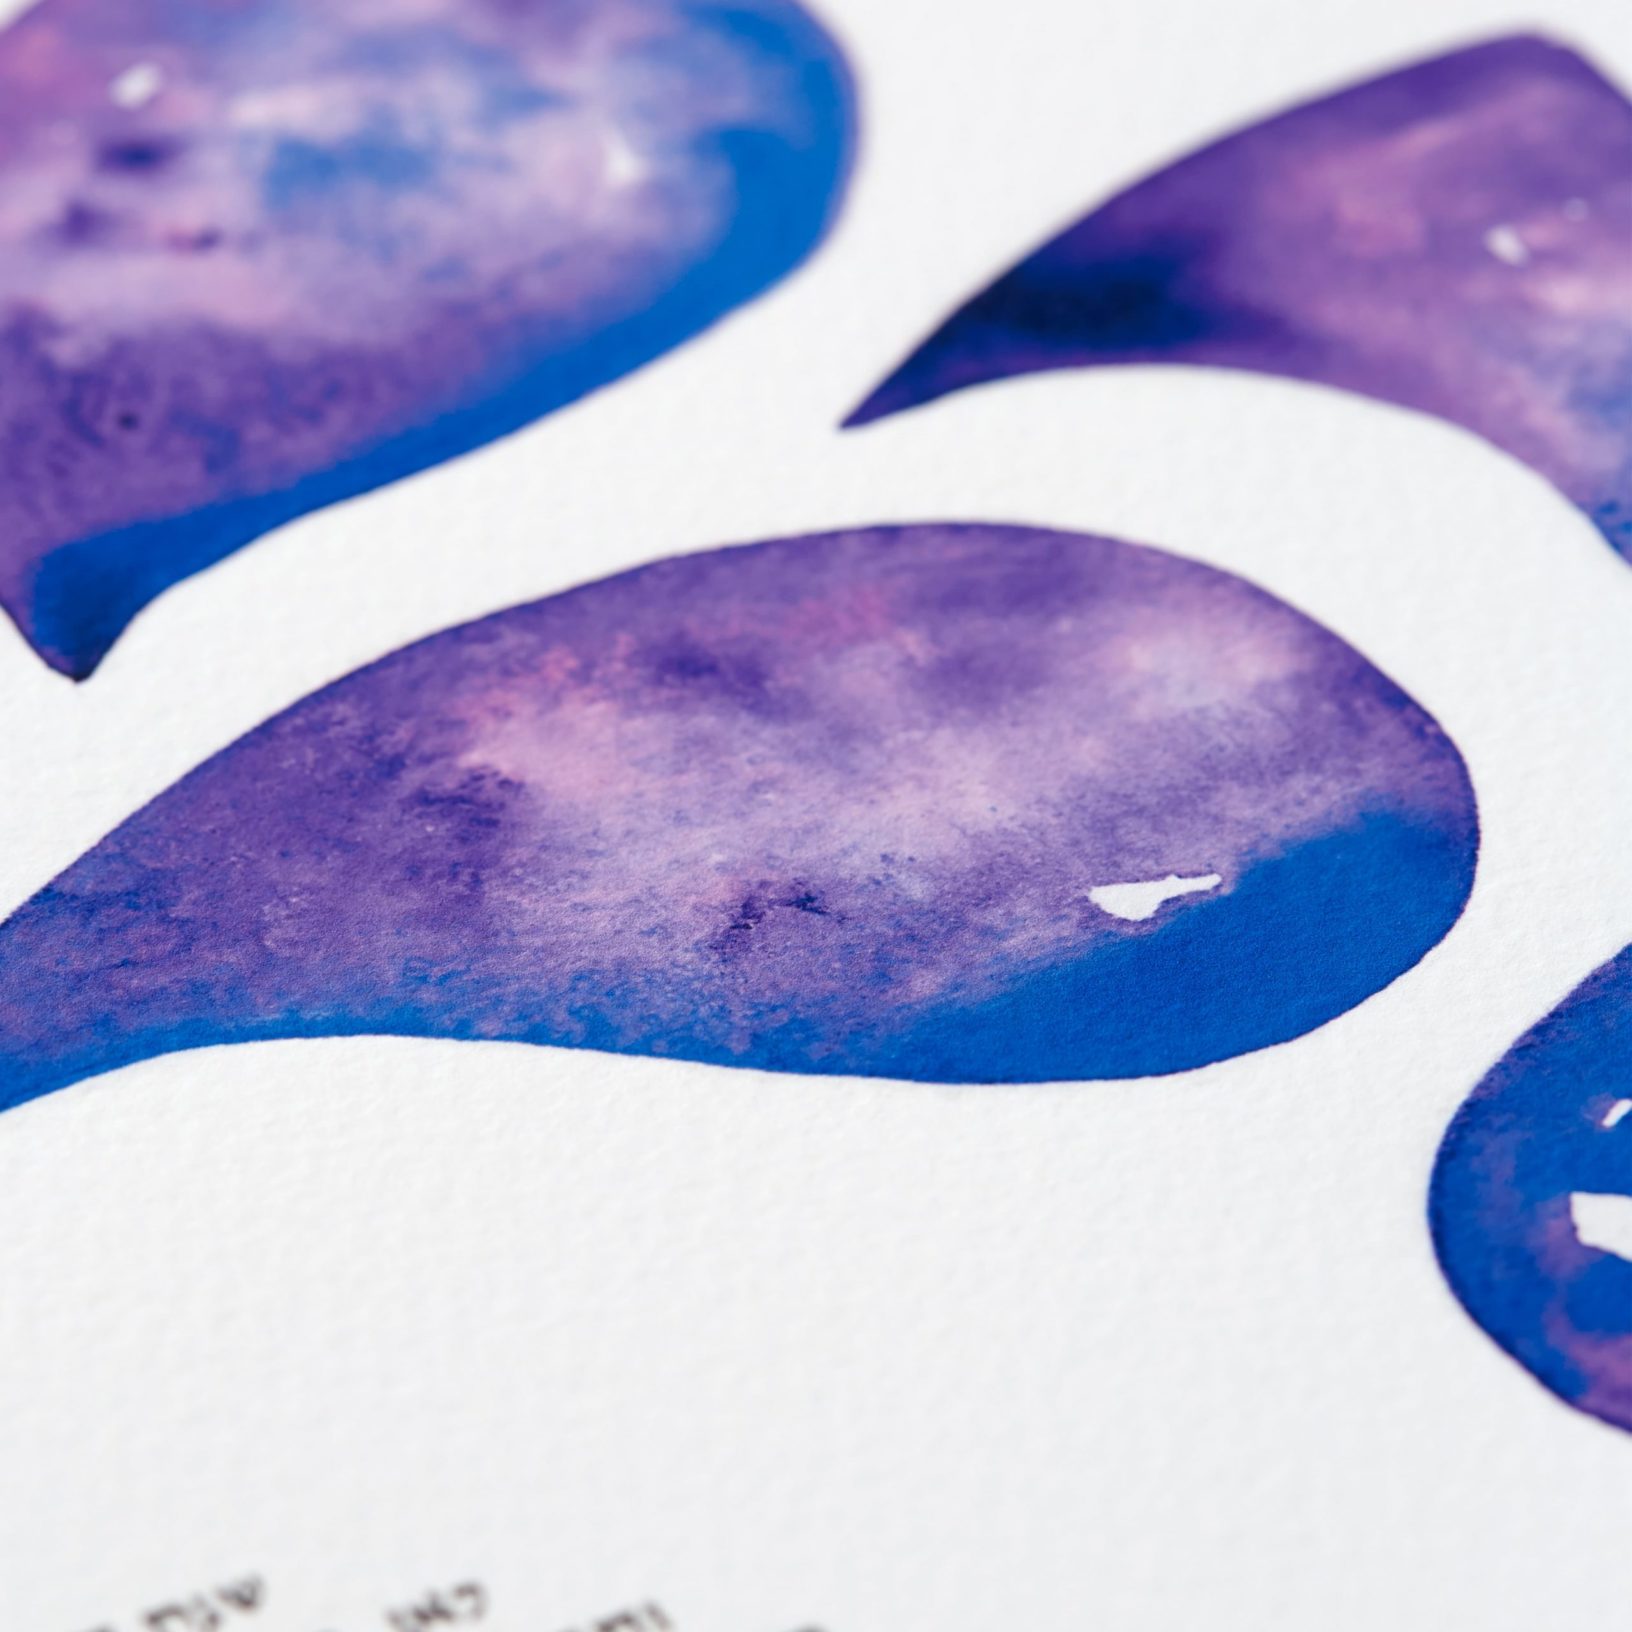 Mirrored Drops - Blues & Purples Ketubah Marriage Contracts by Britt Yudell